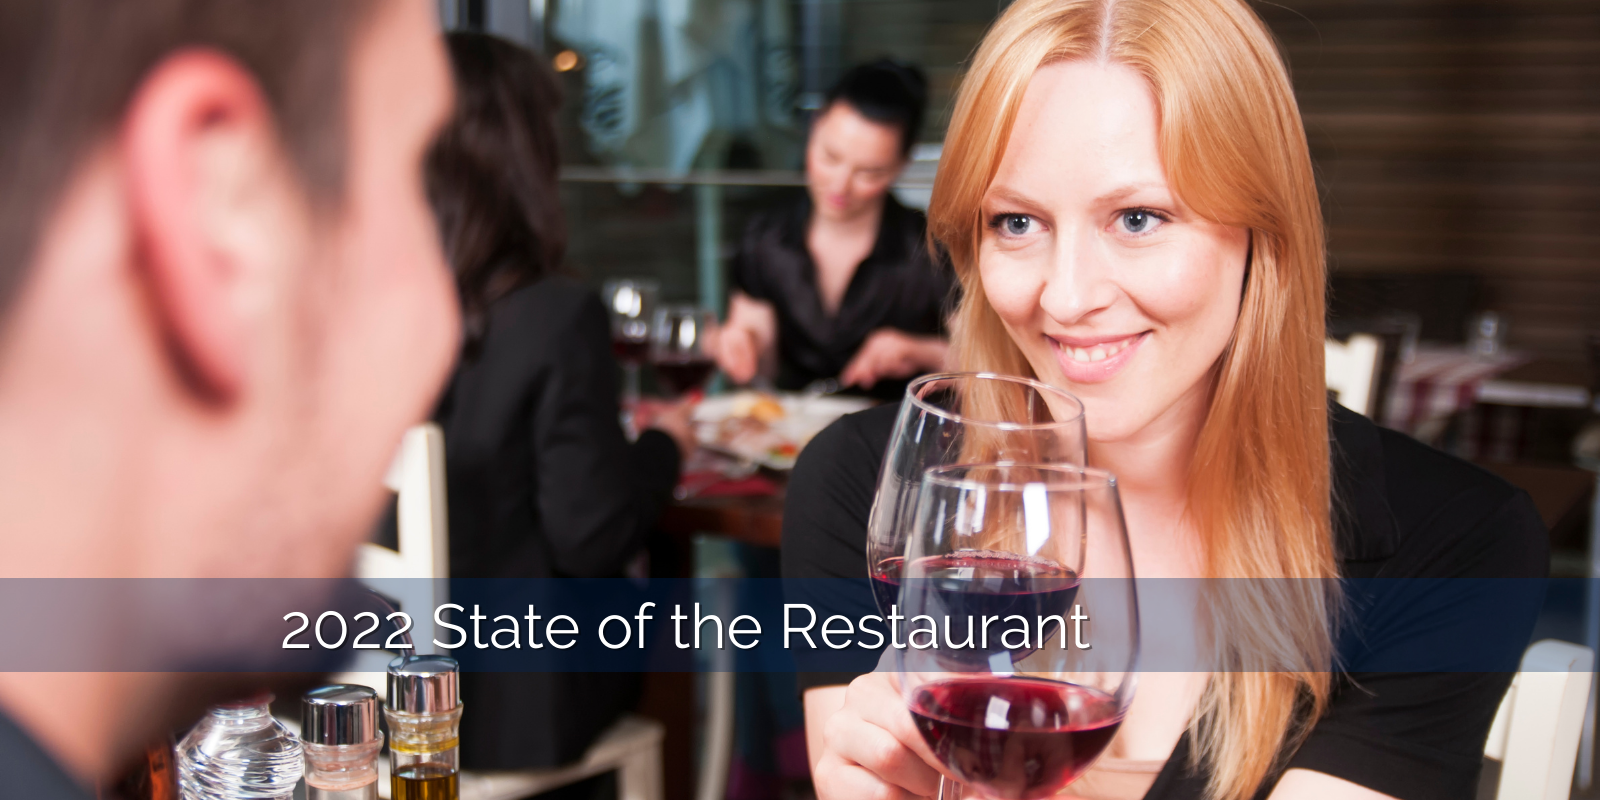 Small Business Consulting - State of the Restaurant 2022